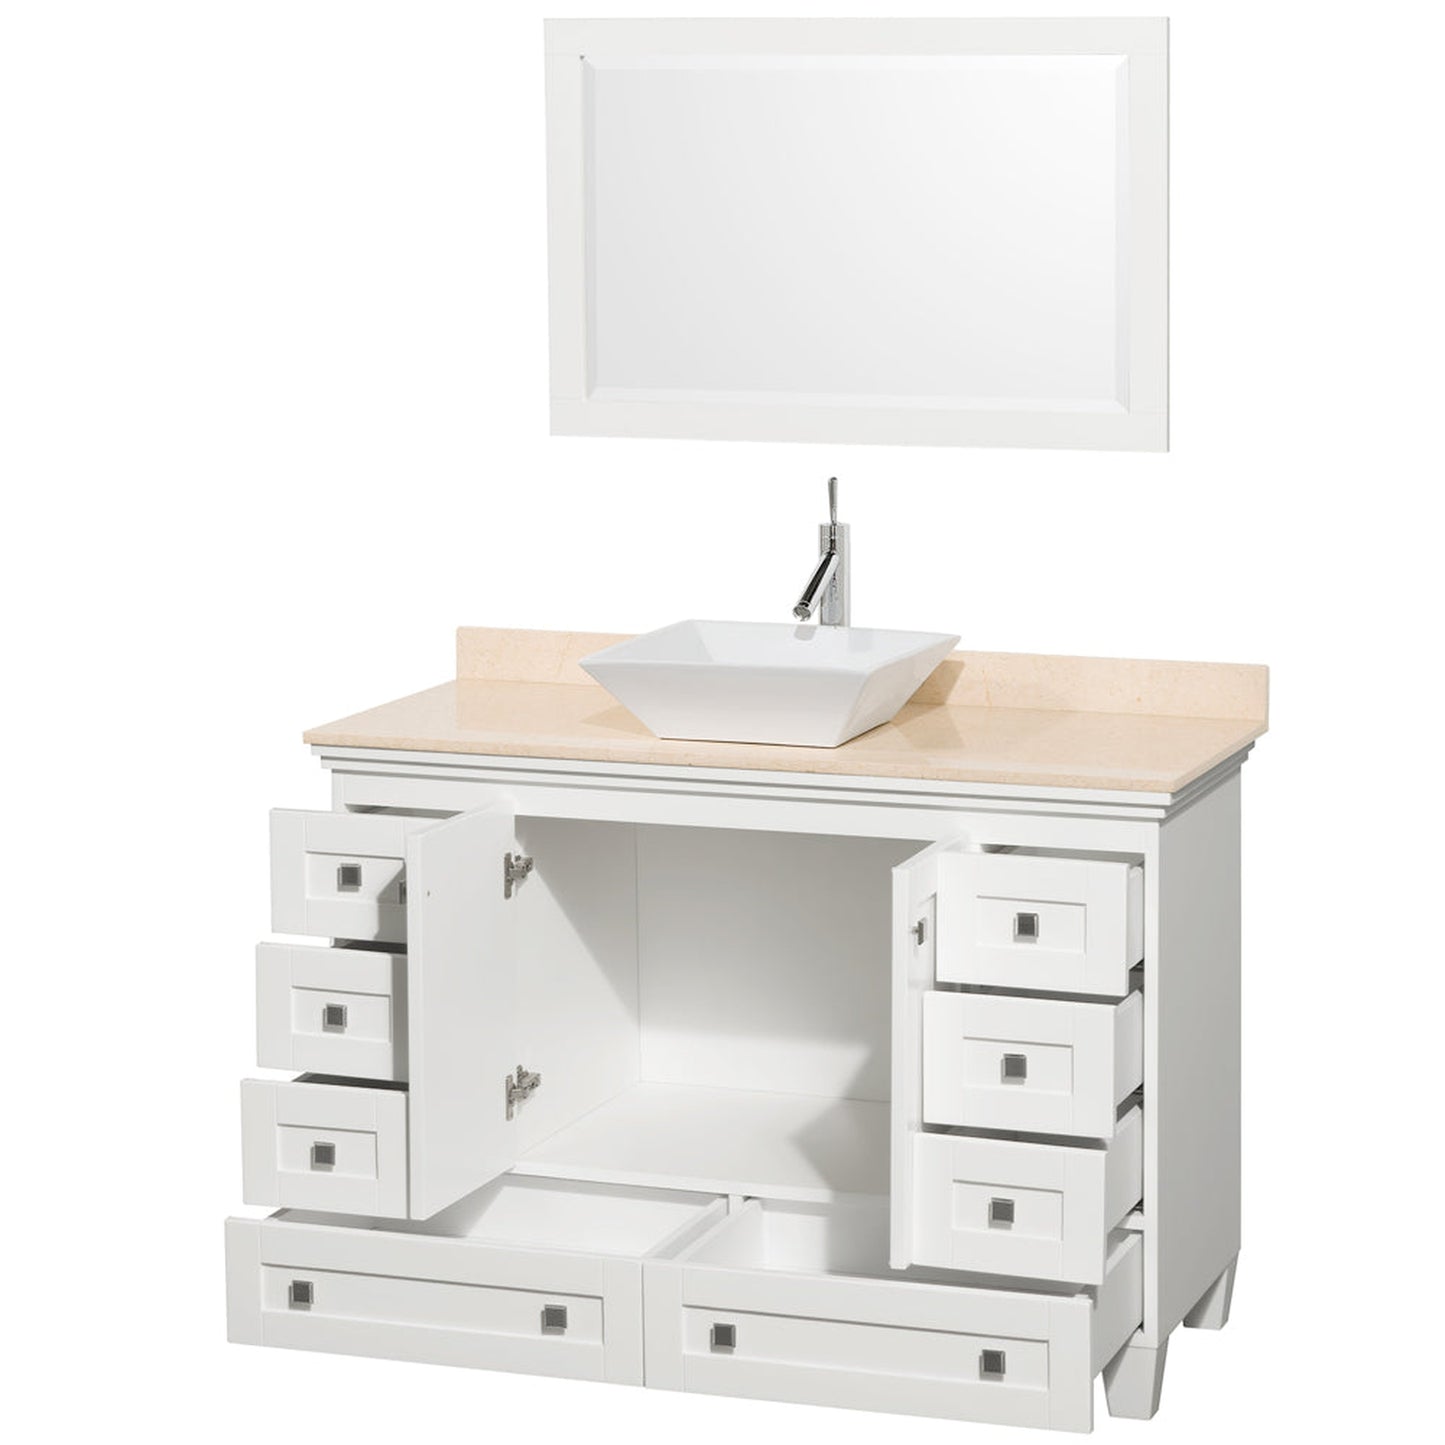 Wyndham Collection Acclaim 48" Single Bathroom Vanity in White With Ivory Marble Countertop, Pyra White Porcelain Sink & 24" Mirror